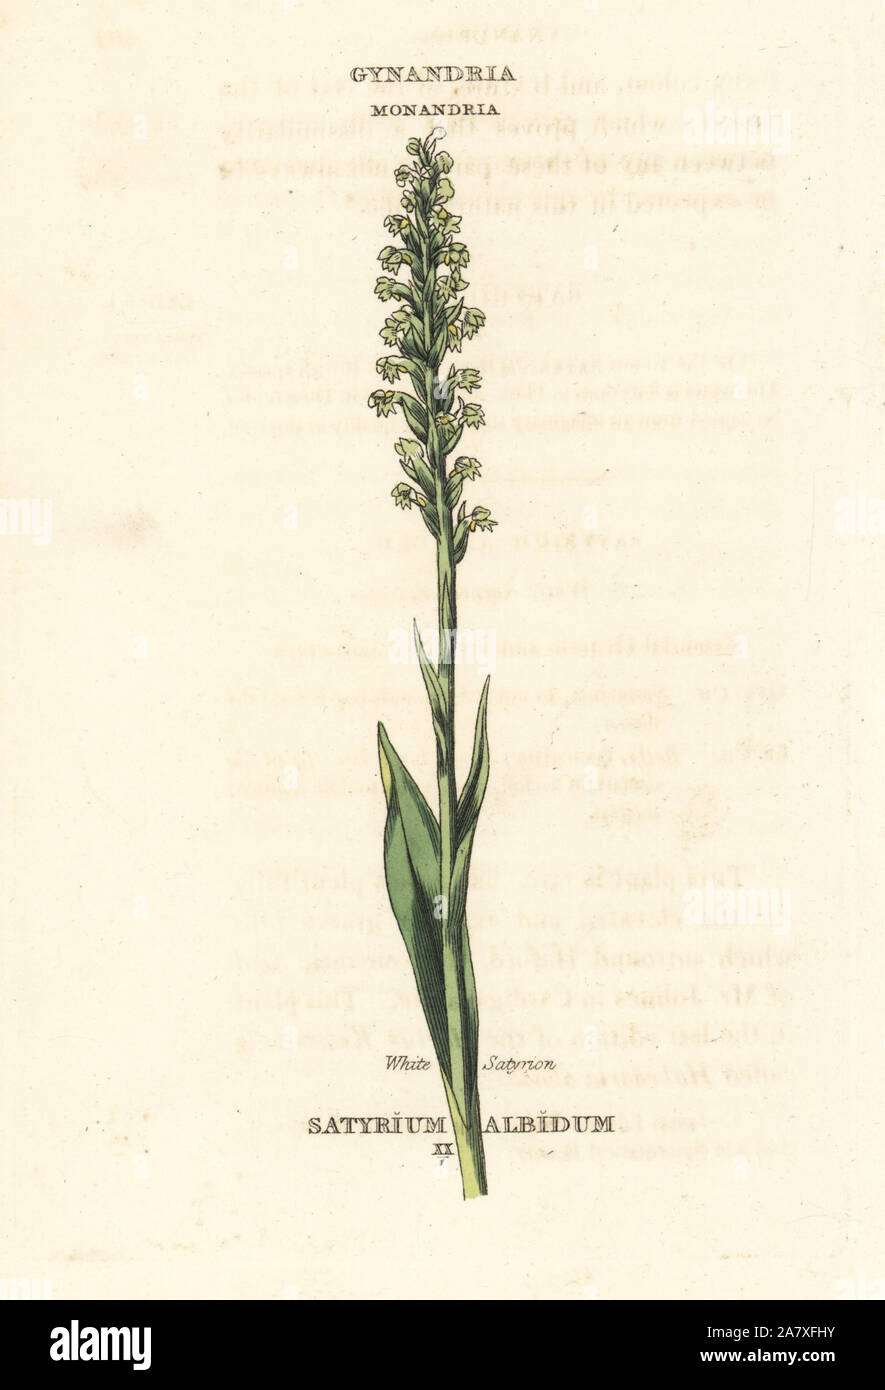 White satyrion orchid, Pseudorchis albida (Satyrium albidum). Handcoloured copperplate engraving after an illustration by Richard Duppa from his The Classes and Orders of the Linnaean System of Botany, Longman, Hurst, London, 1816. Stock Photo